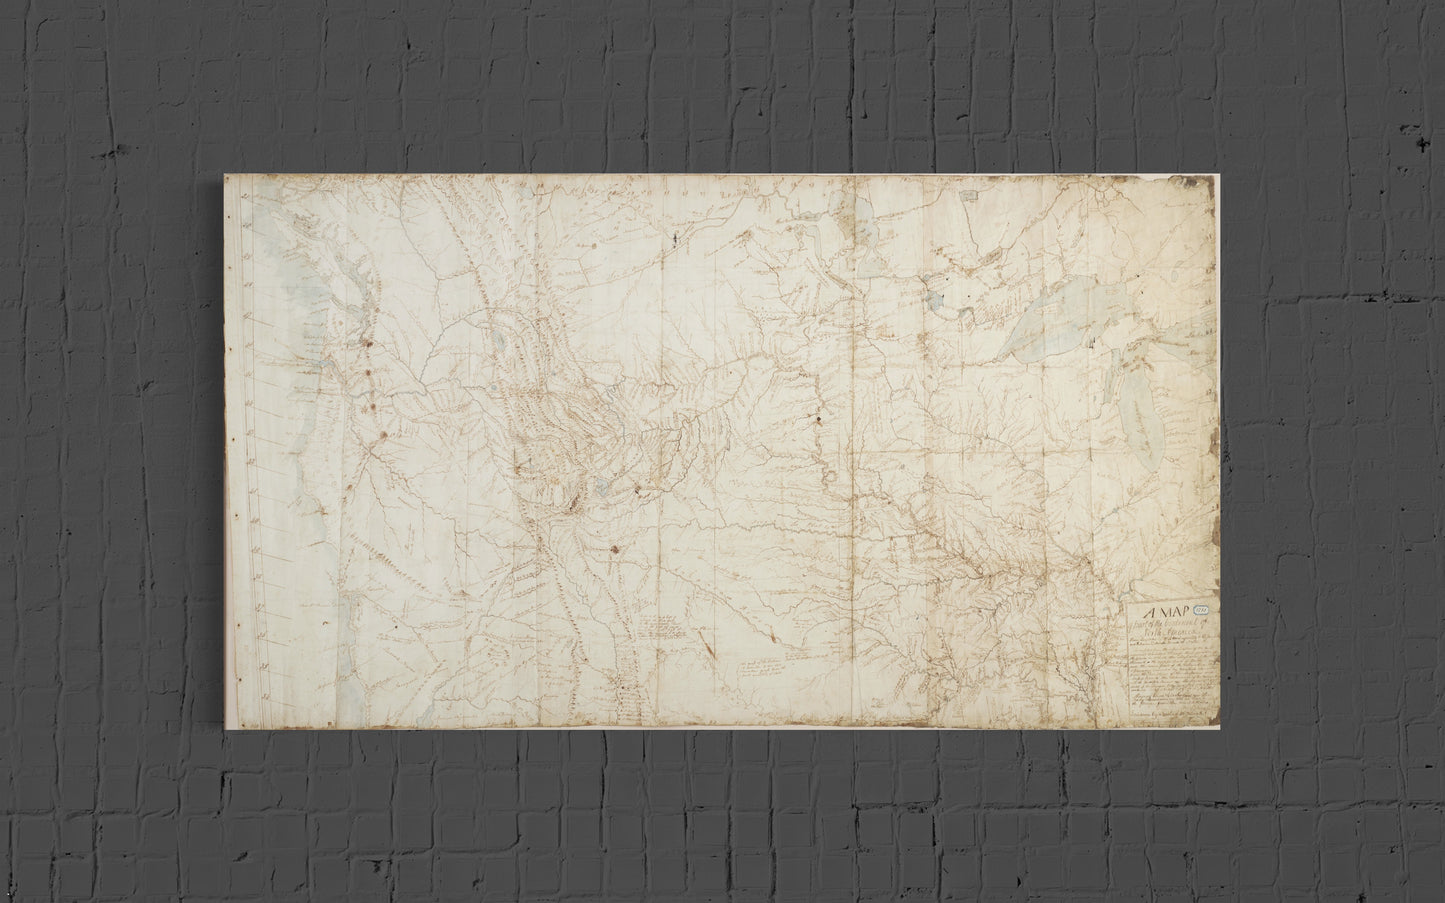 William Clark's 1810 Map from the Lewis & Clark Expedition - 1804-1806